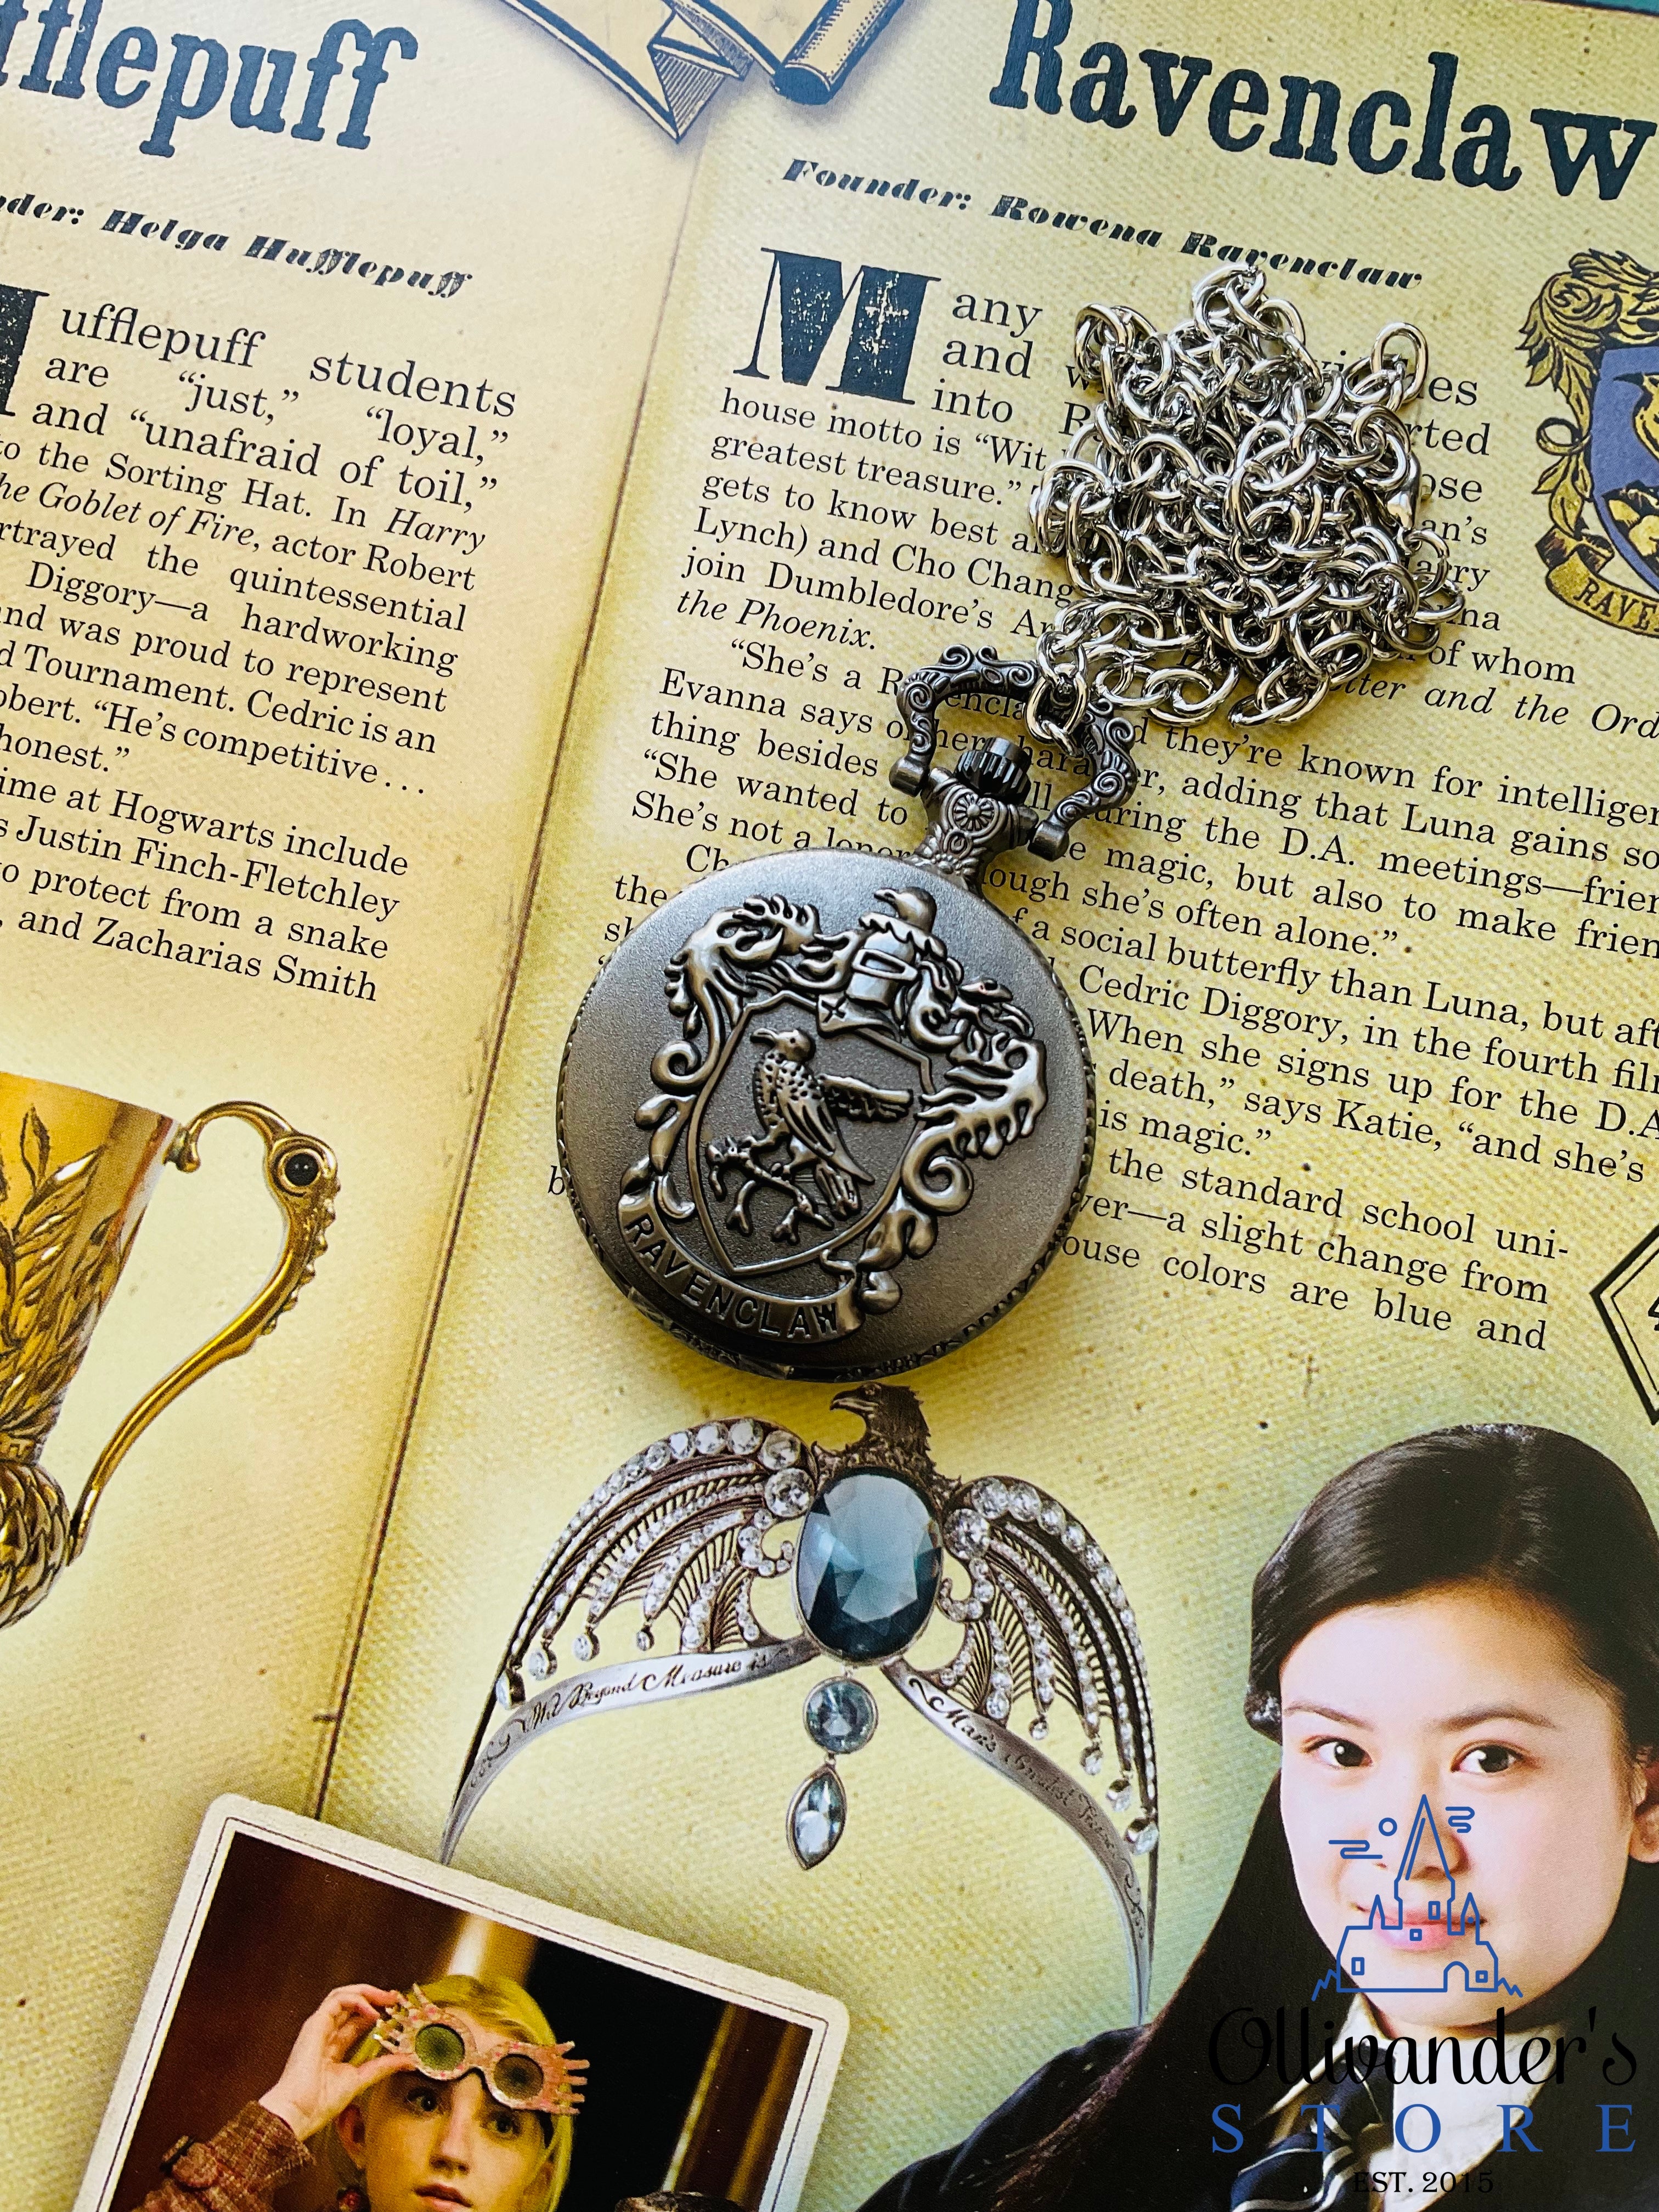 Ravenclaw pocket watch, boxed